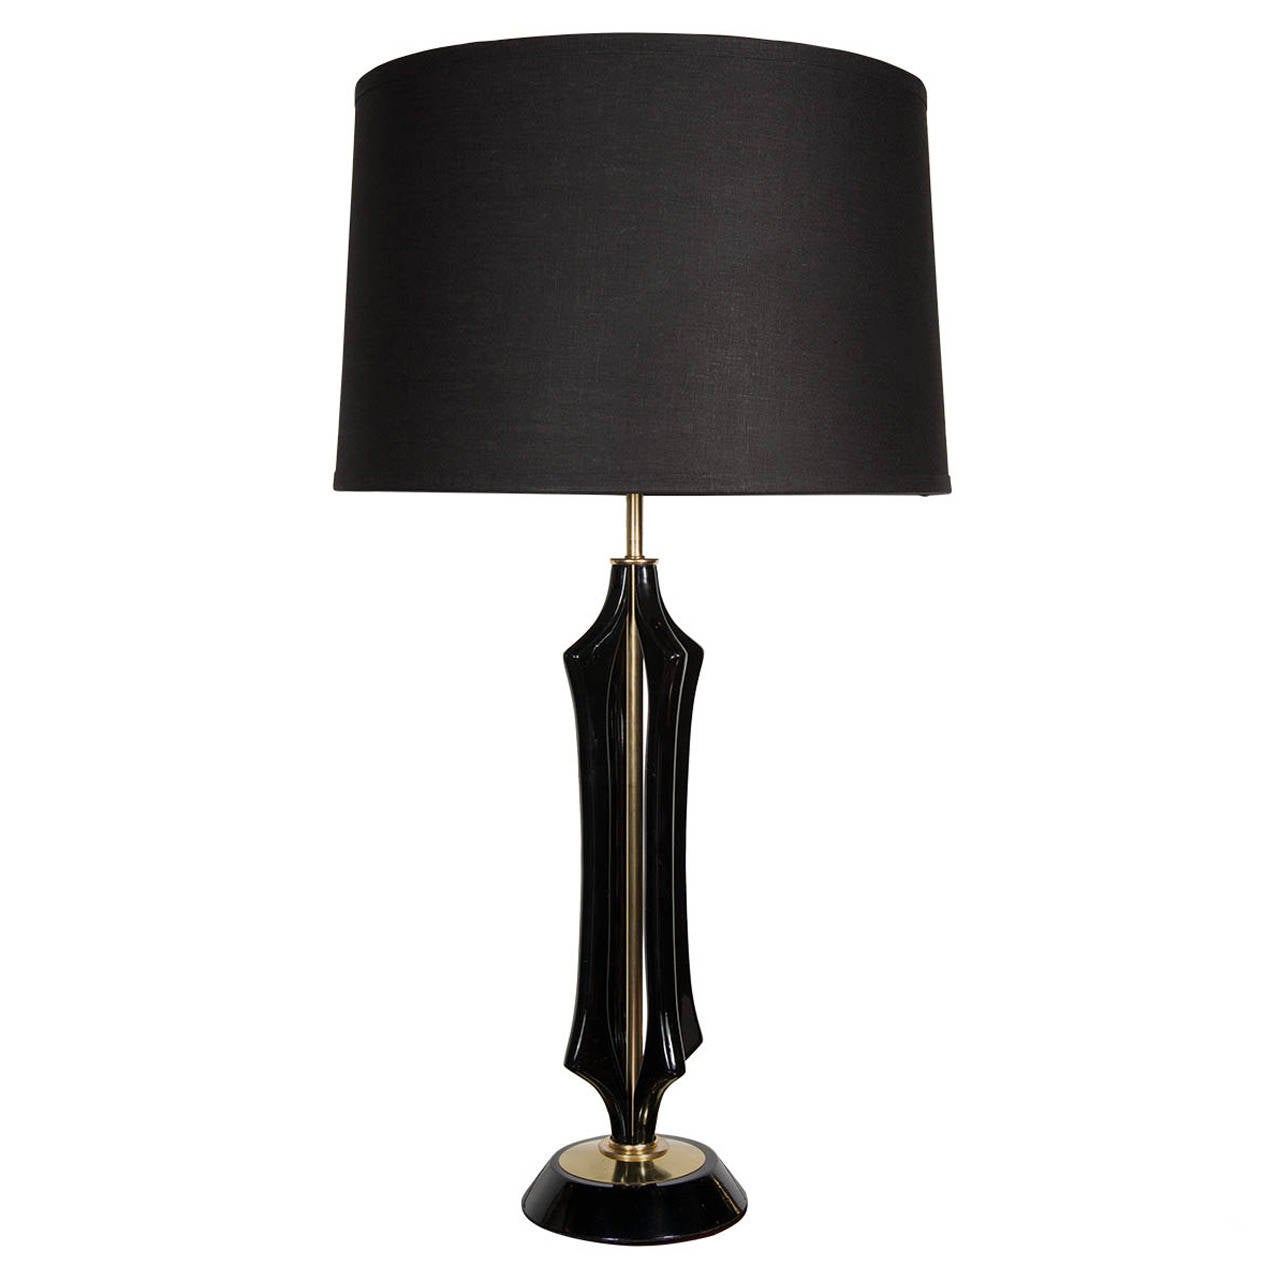 Mid-Century Modernist Sculptural Lamp in Ebonized Walnut and Brass For Sale